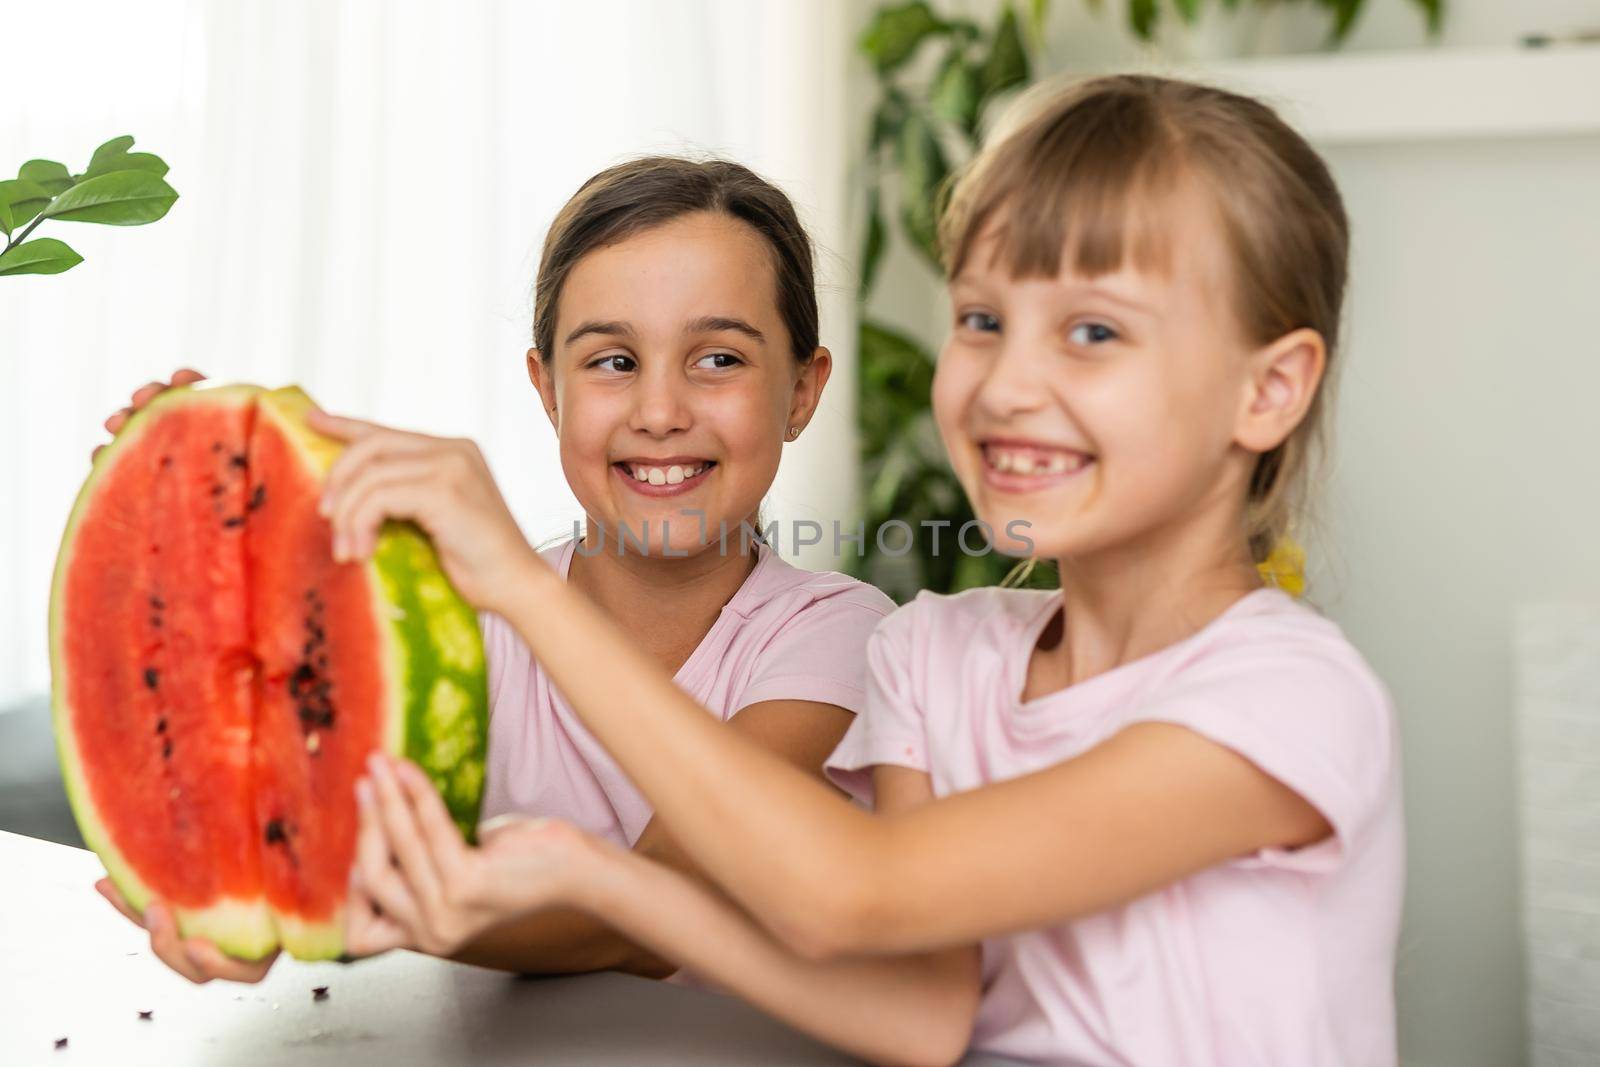 Two kids eating one slice of watermelon. Kids eat fruit outdoors. Healthy snack for children